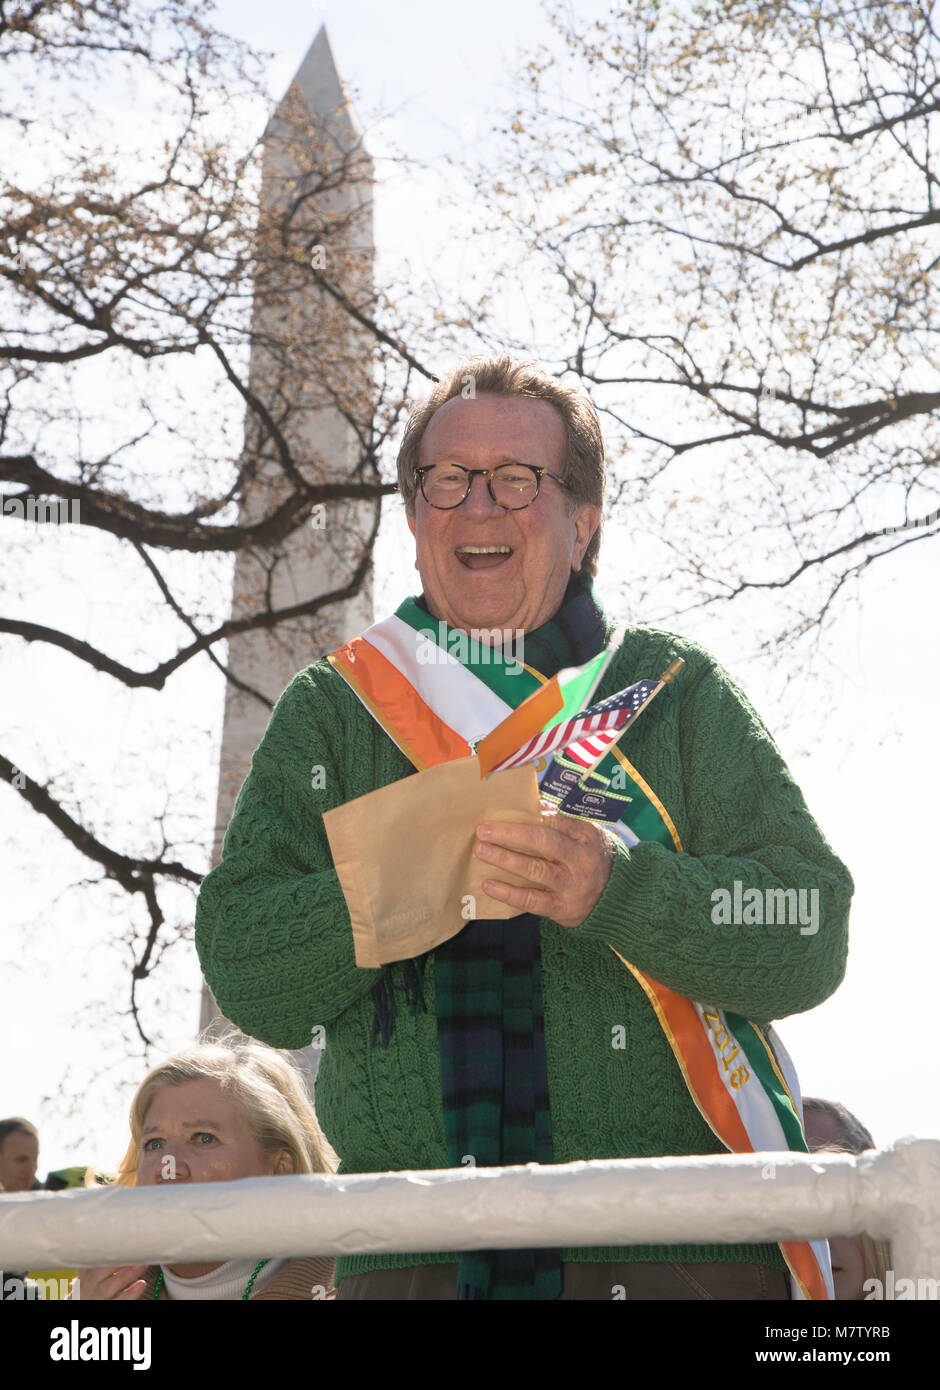 Parade Grand Marshal Pat Collins waves from the review stand at the 48th Annual St. Patrick's Parade of Washington, D.C. on Sunday, March 11, 2018. (Photo by Jeff Malet) Photo via Newscom Stock Photo